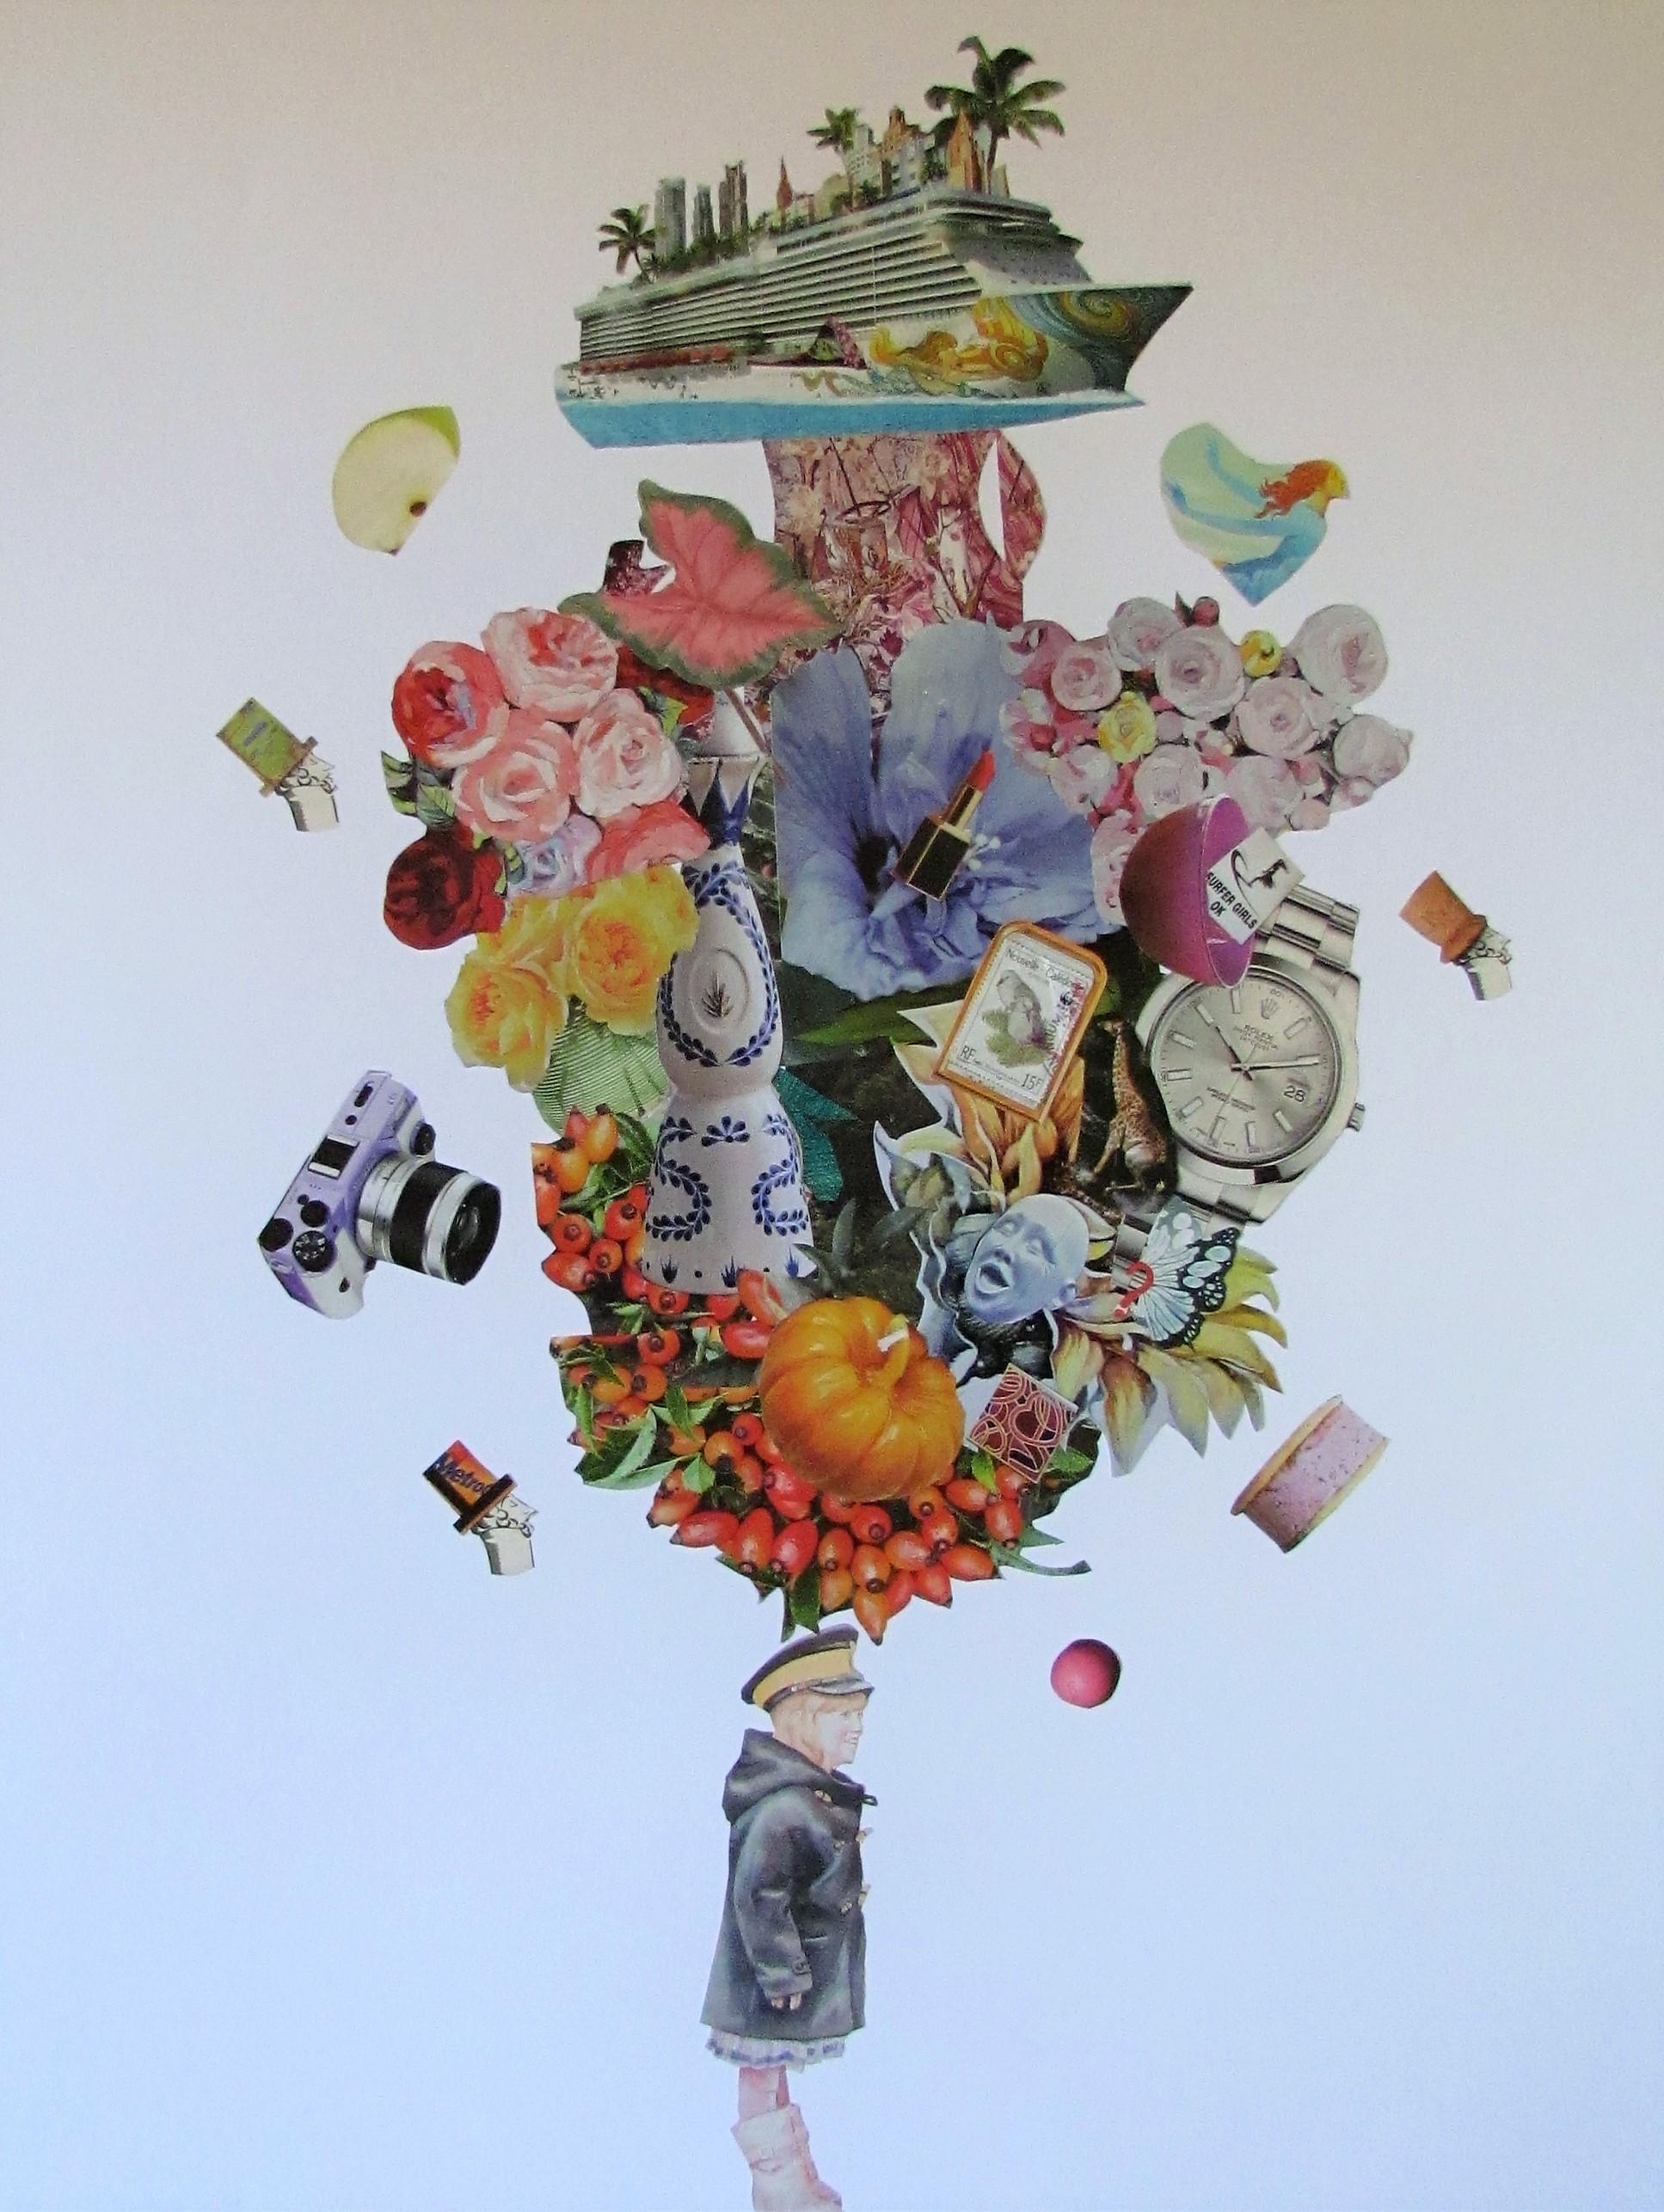 Imaginary Worlds 3 - collage, framed - Mixed Media Art by Alison Keenan